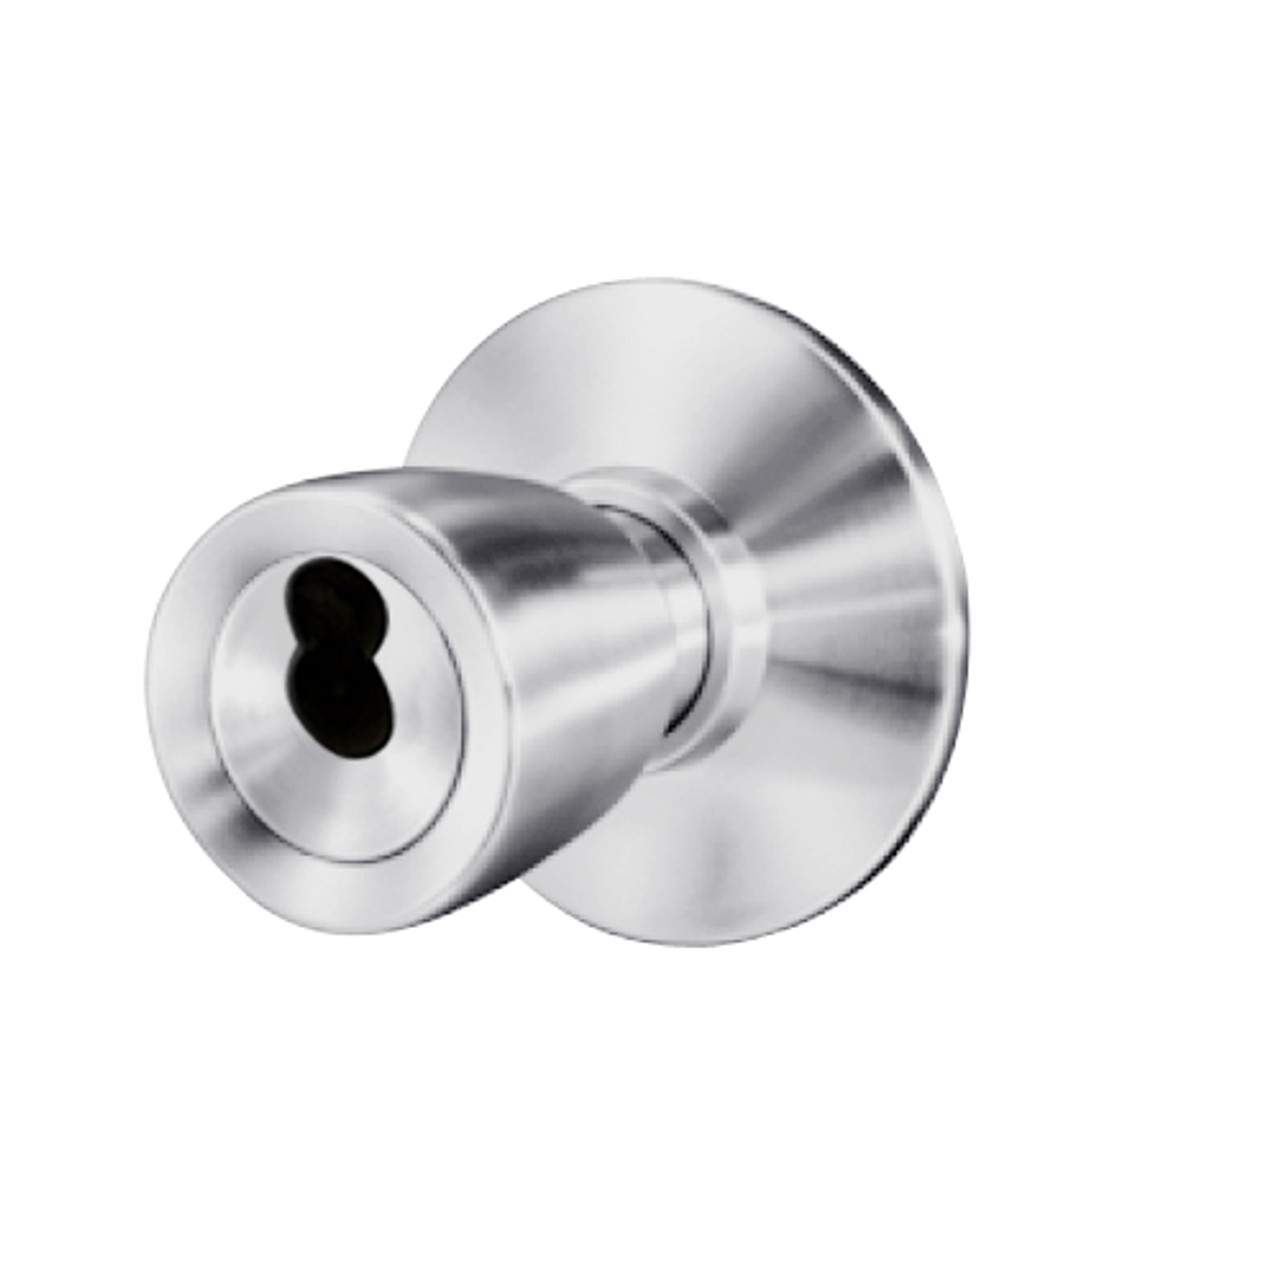 8K37YD6DS3626 Best 8K Series Exit Heavy Duty Cylindrical Knob Locks with Tulip Style in Satin Chrome